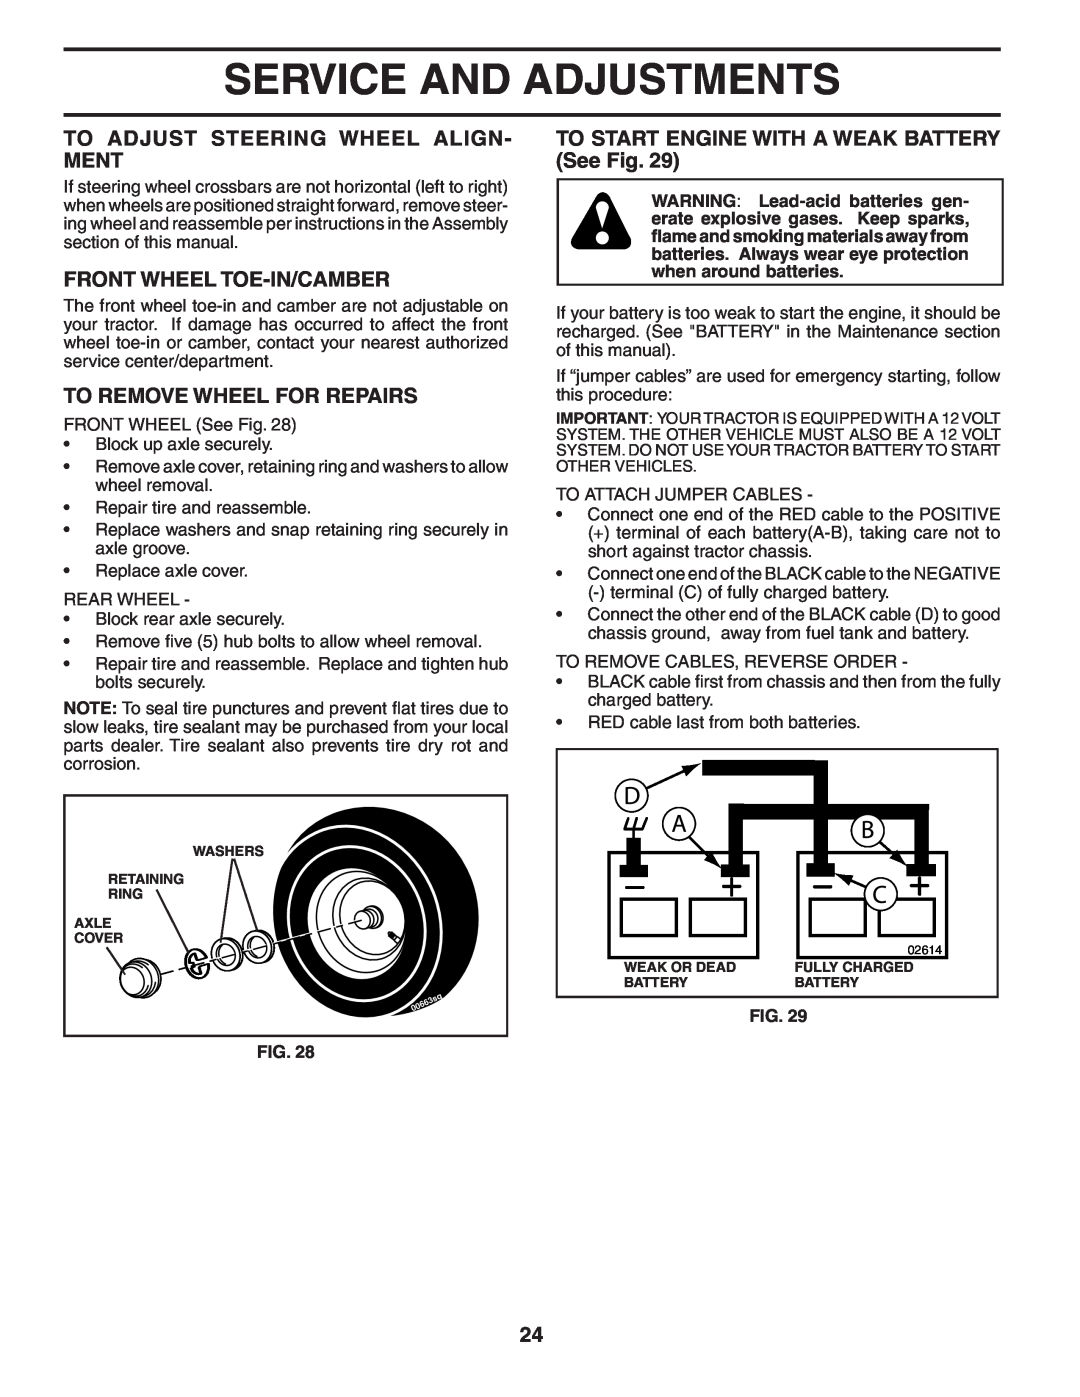 Poulan PBGT27H54 manual To Adjust Steering Wheel Align- Ment, Front Wheel Toe-In/Camber, To Remove Wheel For Repairs 